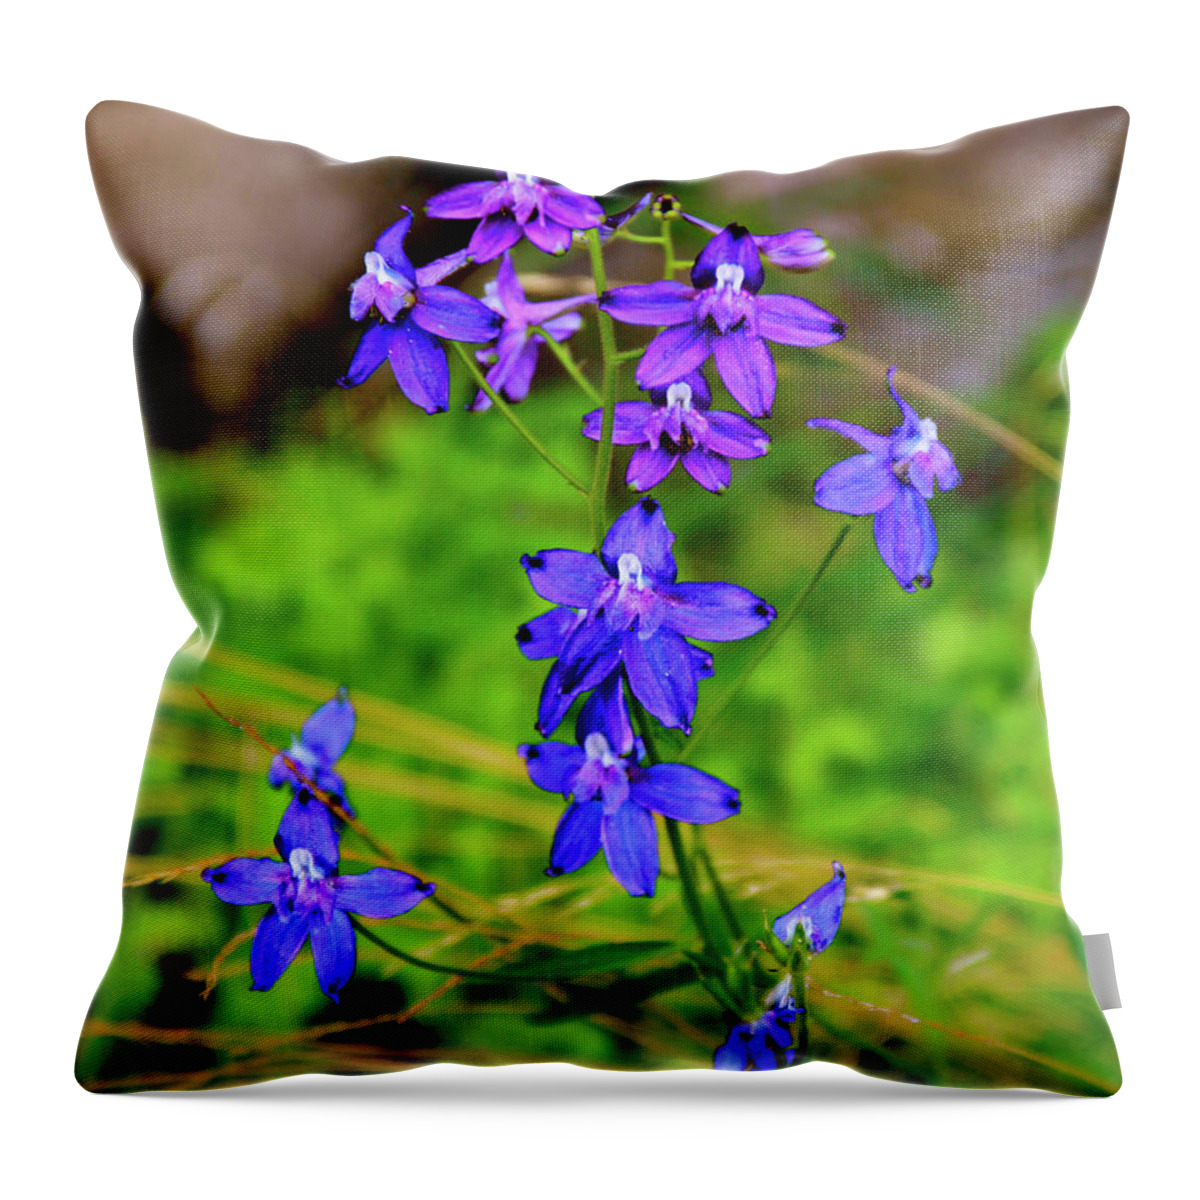 Larkspur Wildflowers Throw Pillow featuring the photograph Wildflower Larkspur by Ed Riche